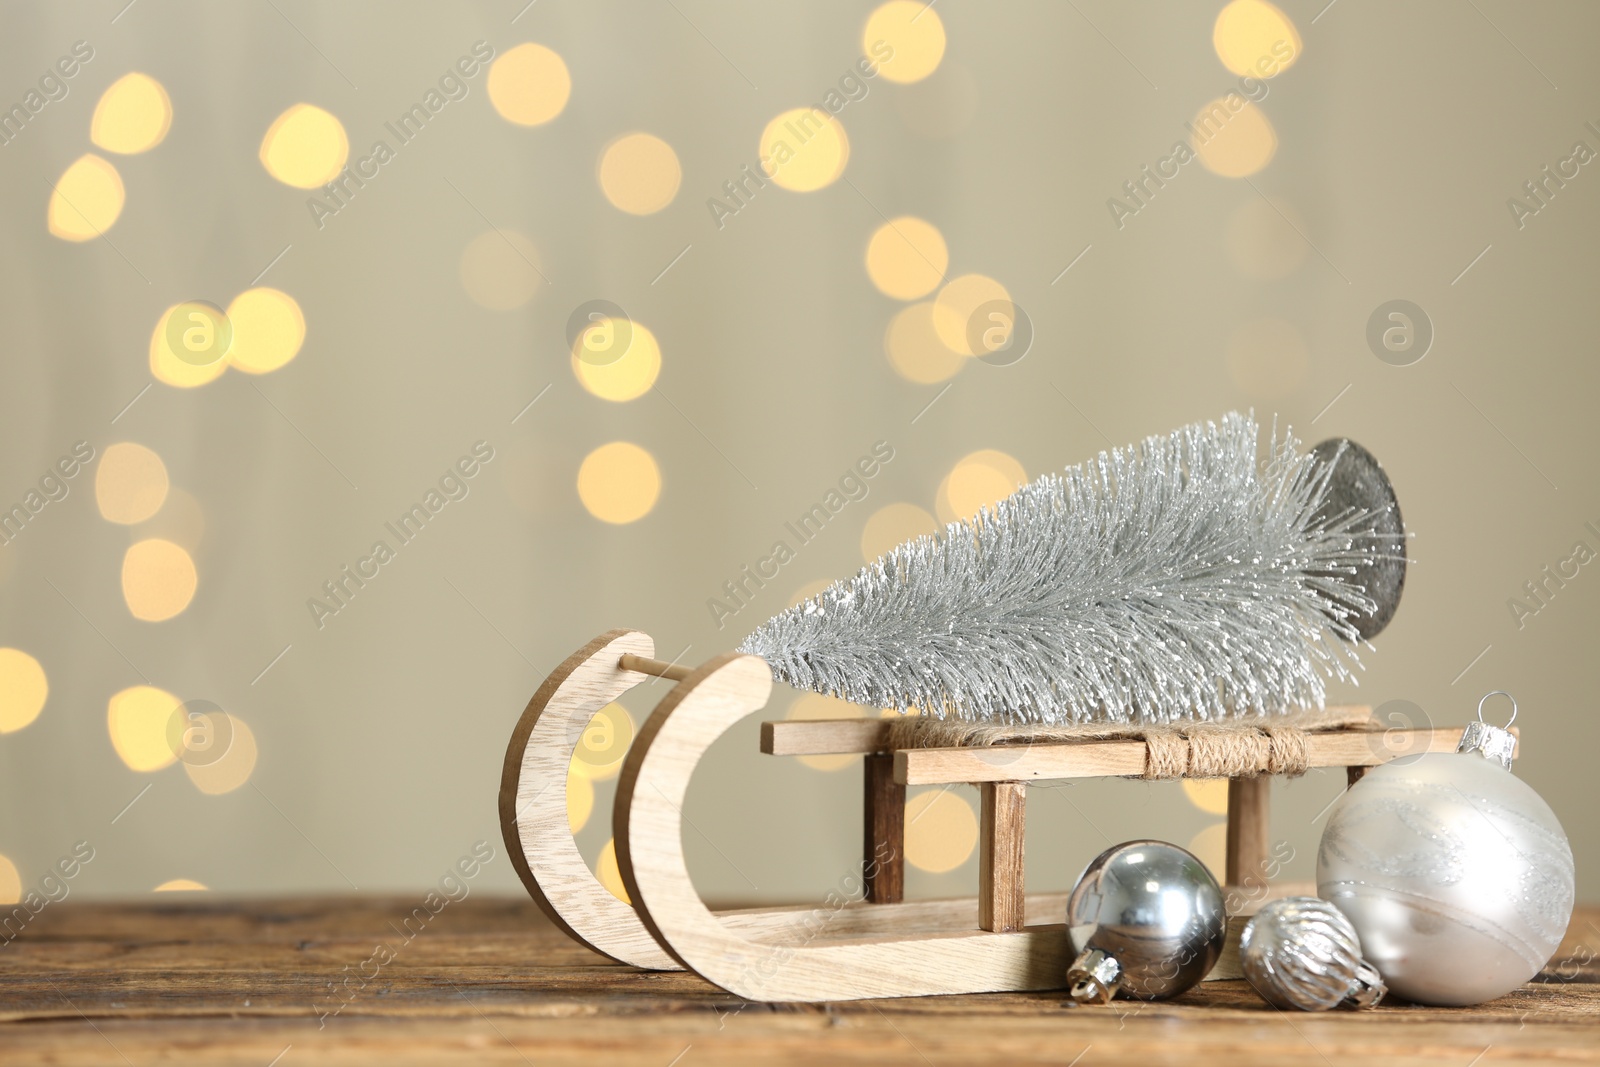 Photo of Decorative sleigh with Christmas tree and balls on wooden table against blurred lights. Space for text